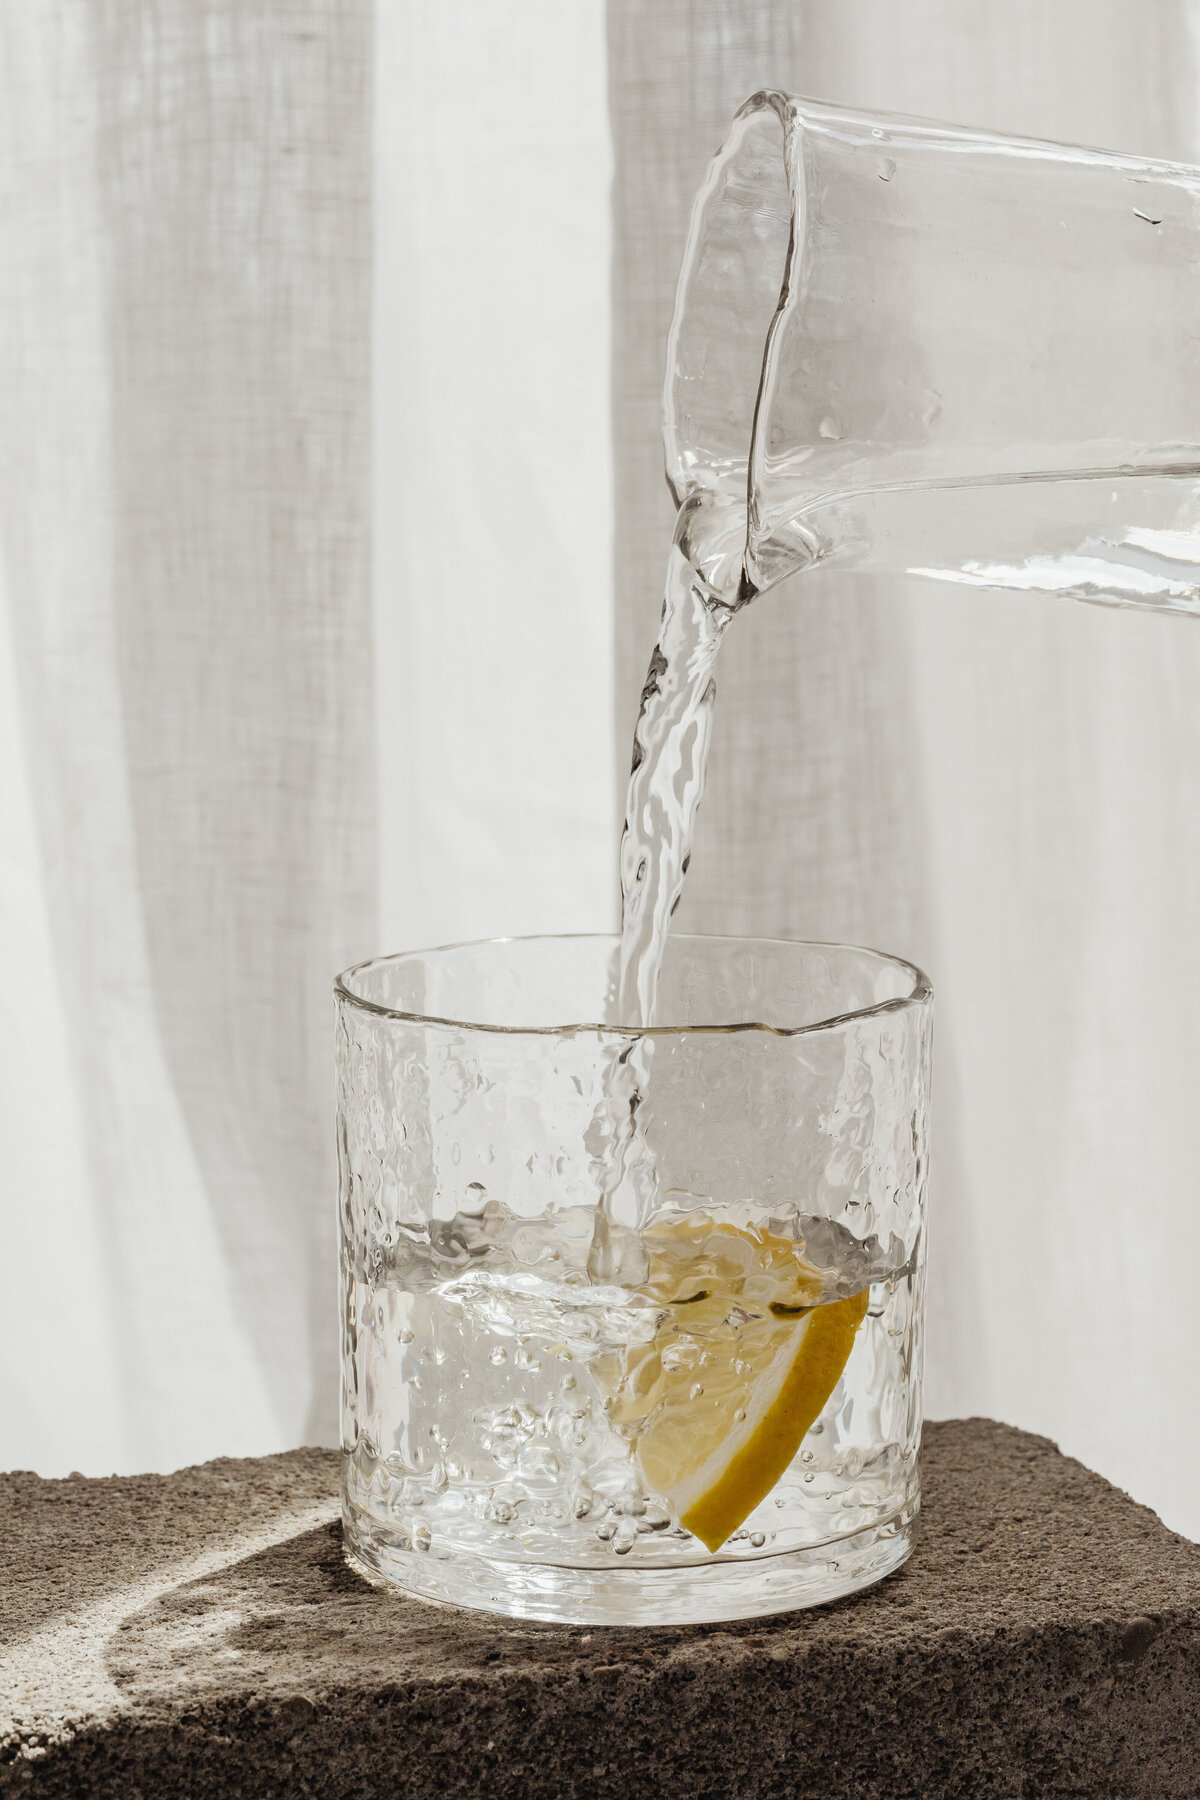 kaboompics_lemon-slice-in-a-glass-of-water-pouring-26581